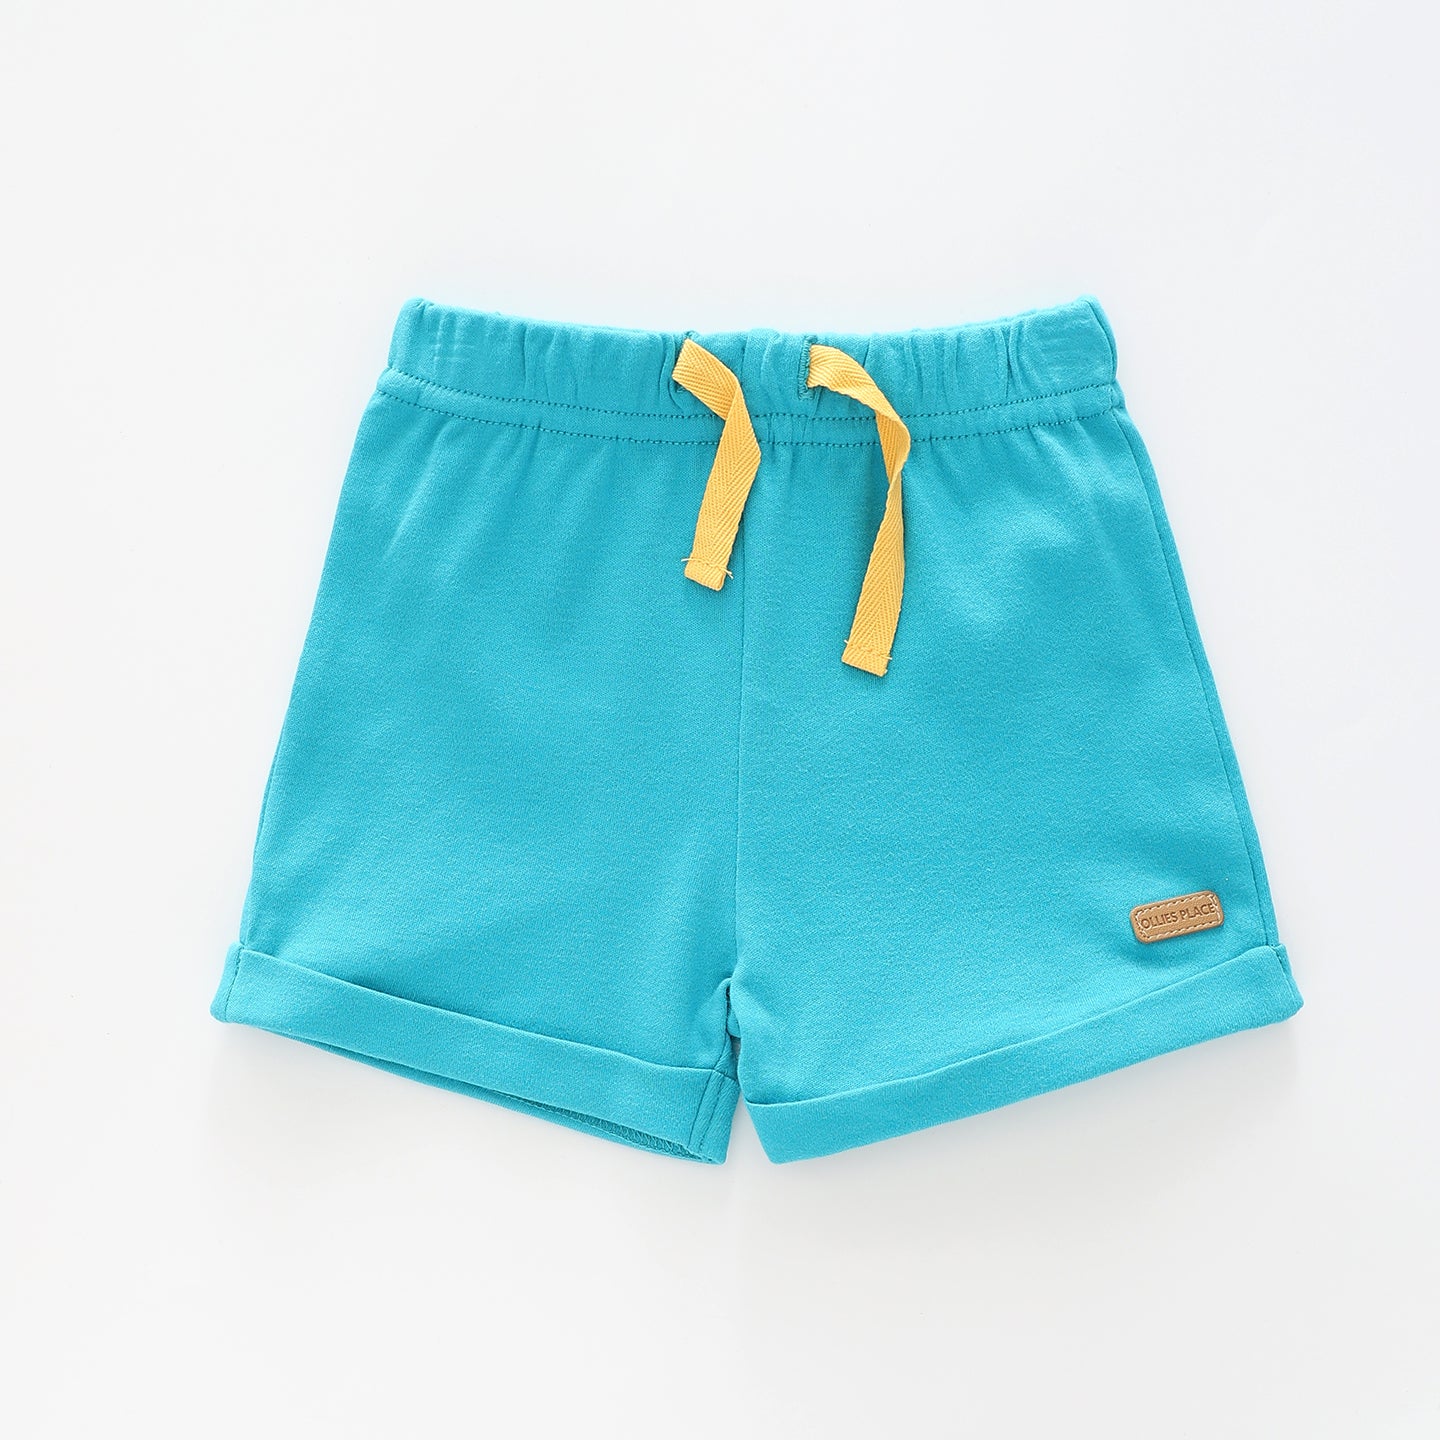 Baby Boys Teal Blue Knit Shorts